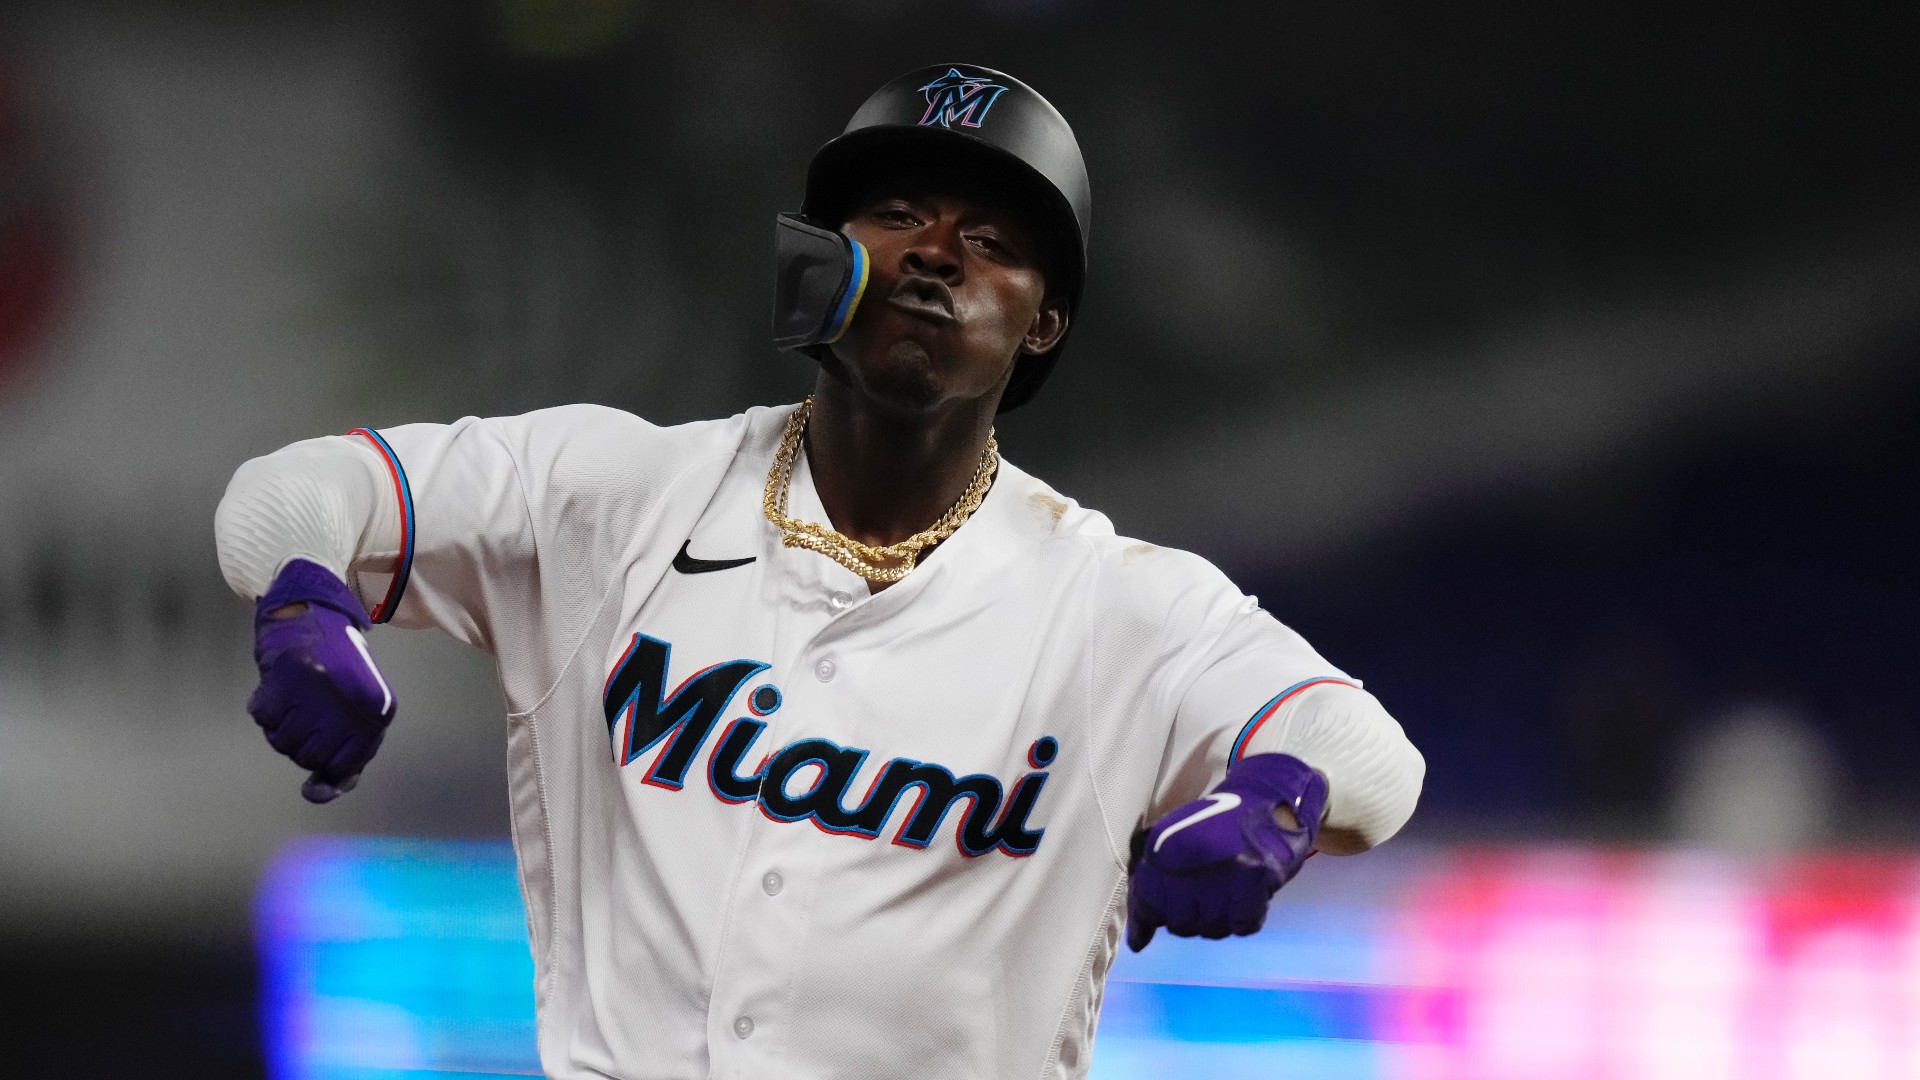 MLB The Show '23 cover athlete is Marlins' Jazz Chisholm – KGET 17